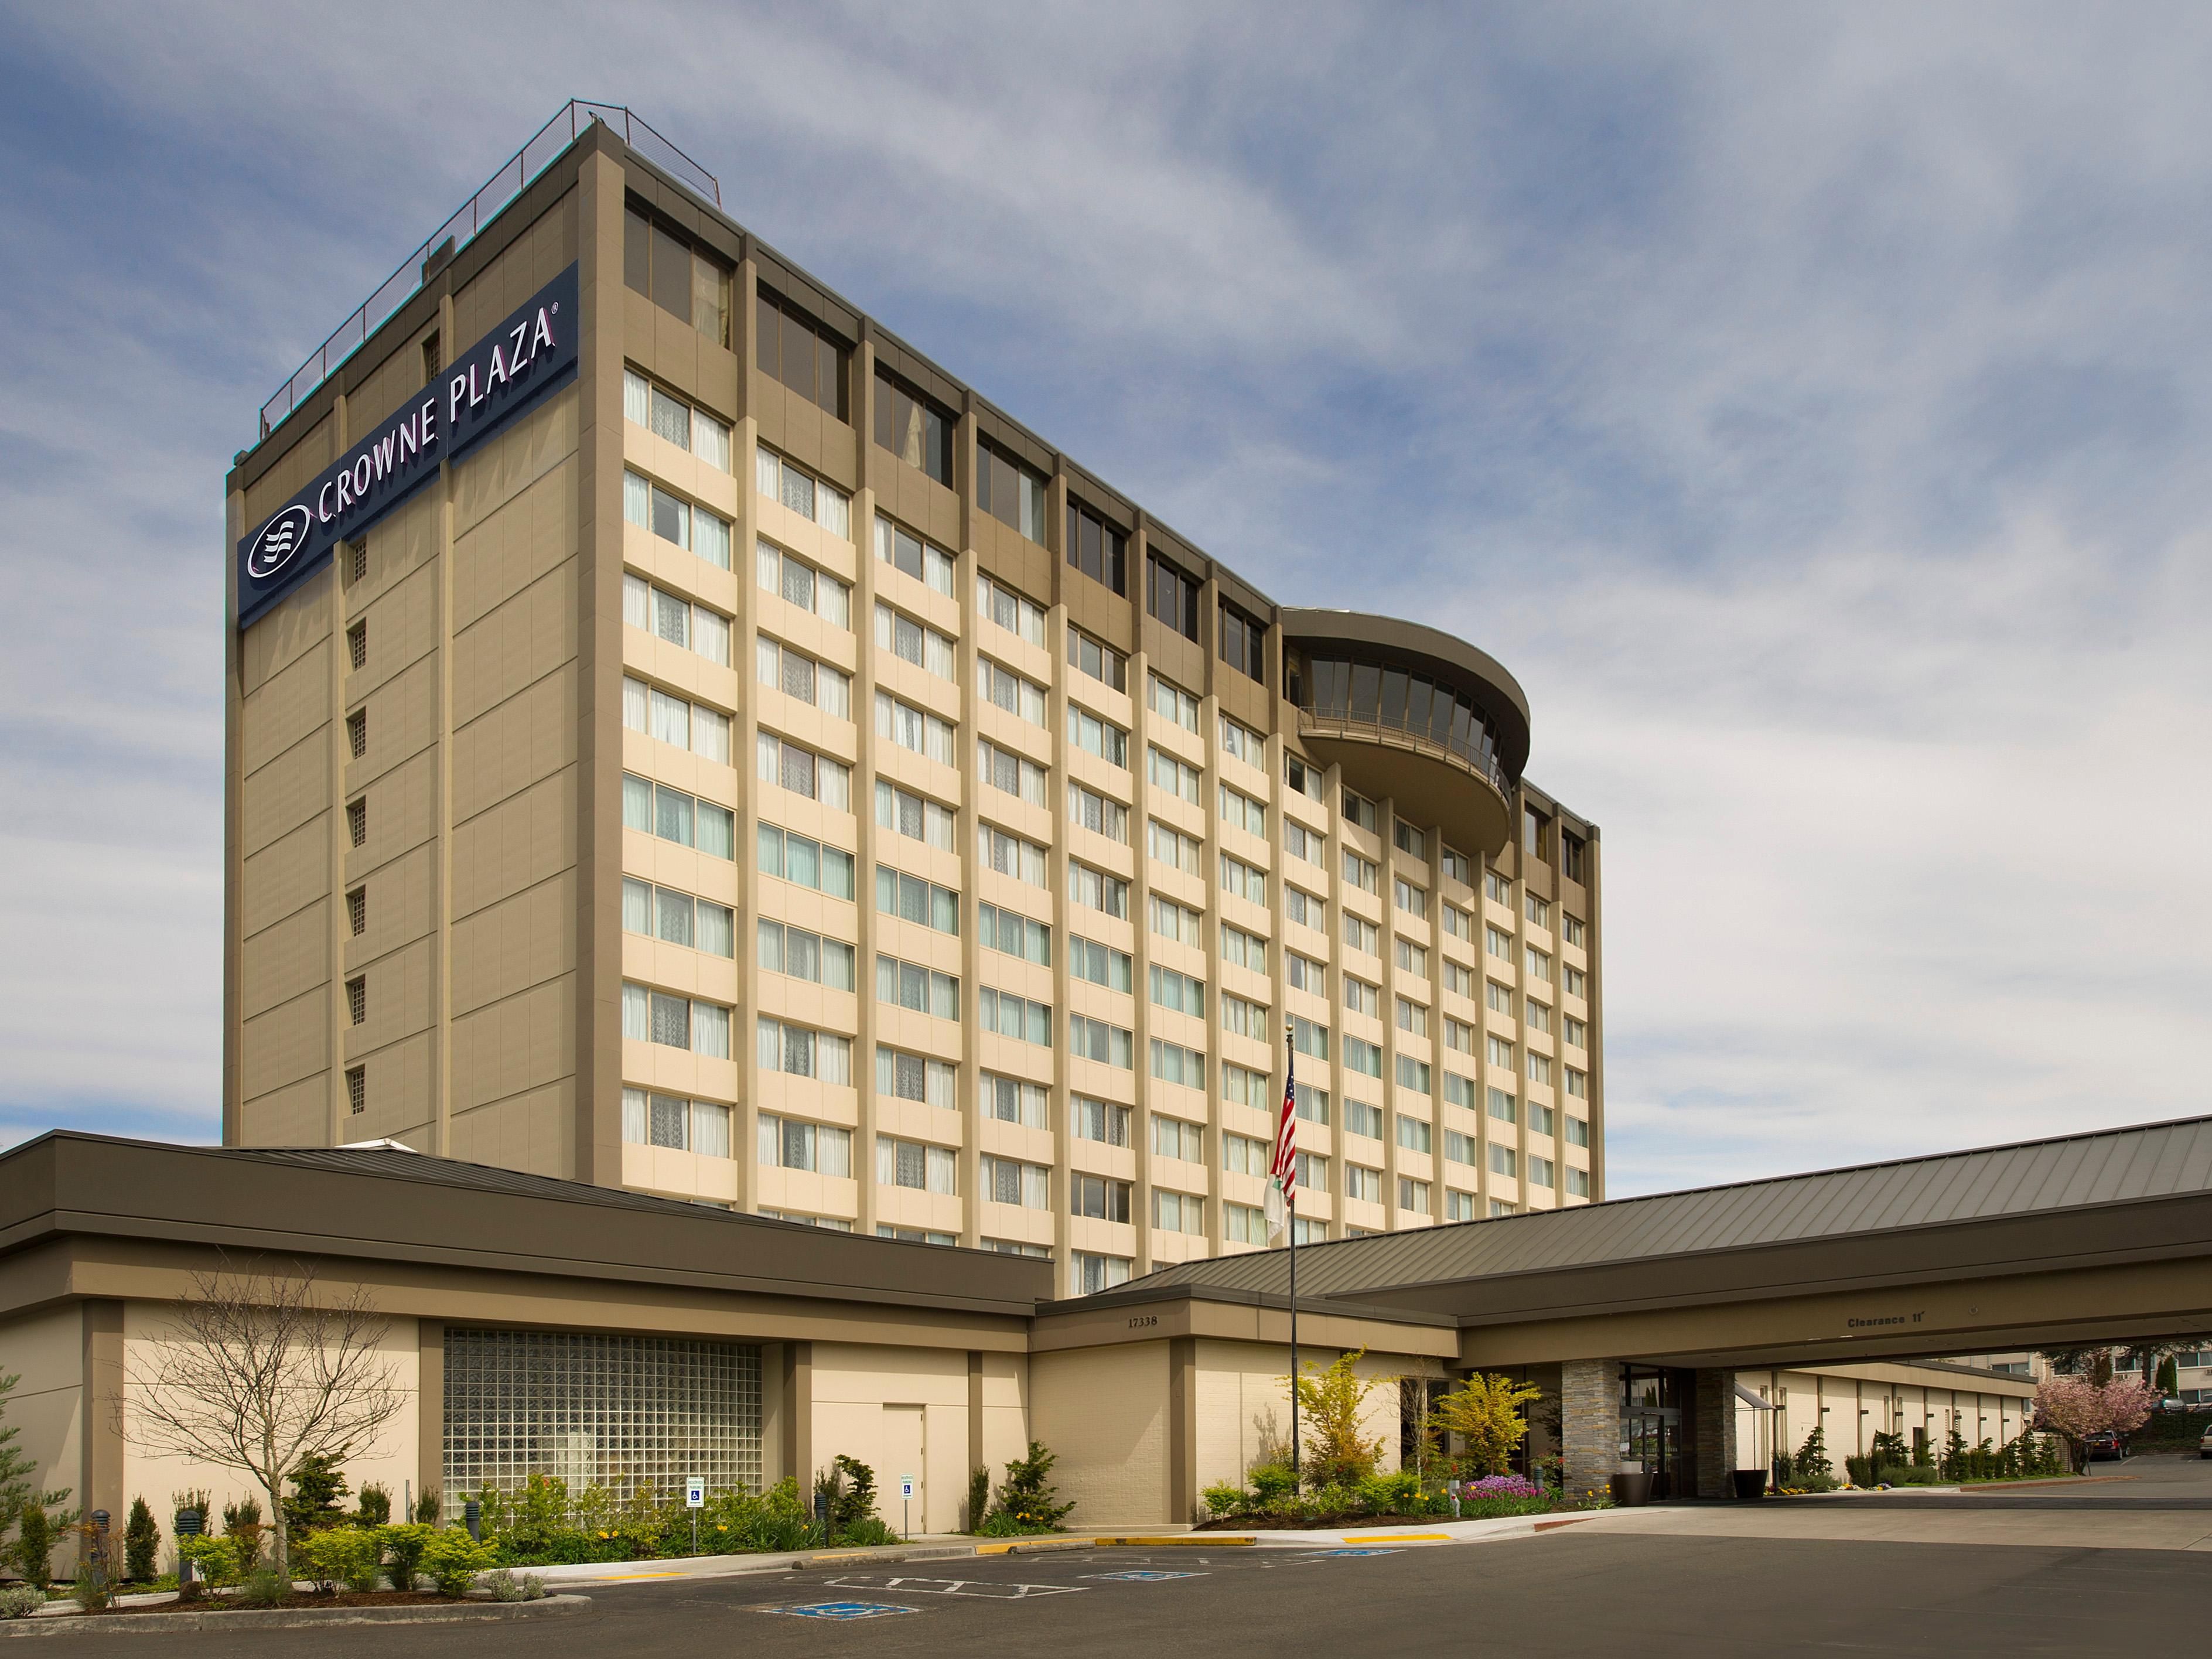 The Crowne Plaza Seattle Airport offers a complimentary 24-hour airport shuttle that runs every 20 minutes. This convenient service ensures that you never have to worry about transportation to or from the airport during your stay. 